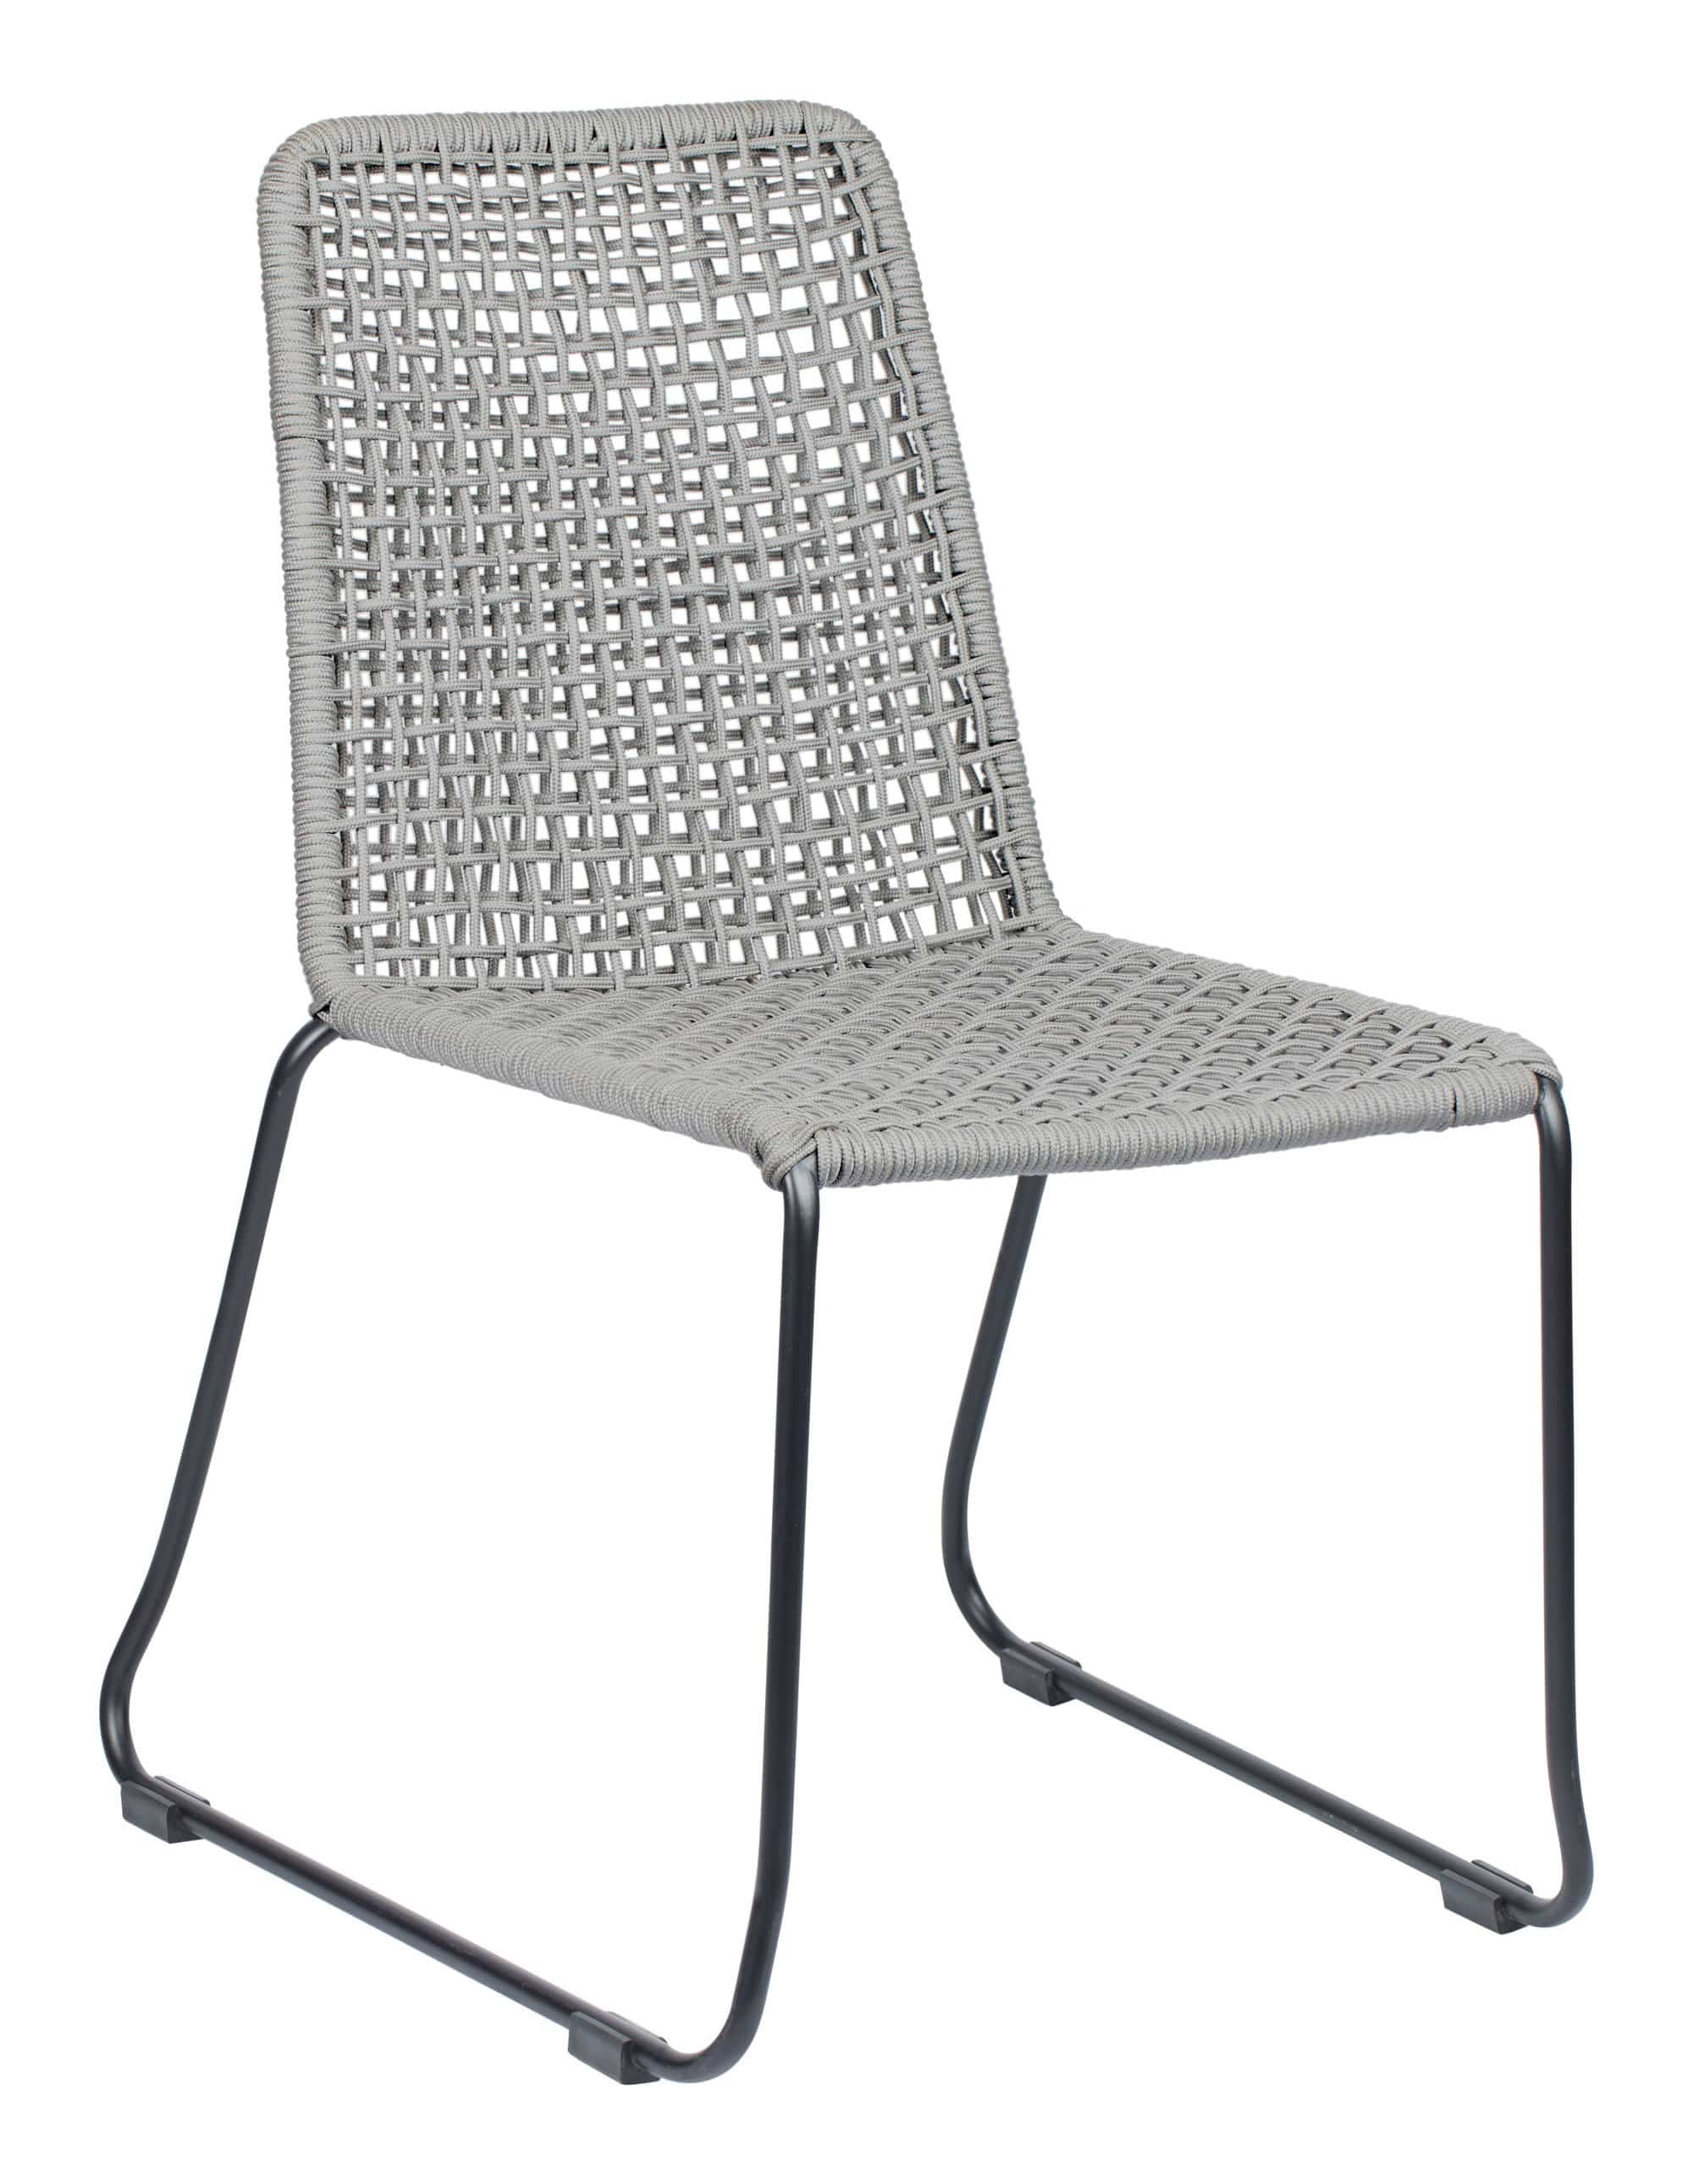 HomeRoots Outdoors Outdoor Dining Chairs Black & Dark Gray / Rope, Steel 22.8" x 25.2" x 34.6" Black & Dark Gray, Rope, Steel, Dining Chair - Set of 2